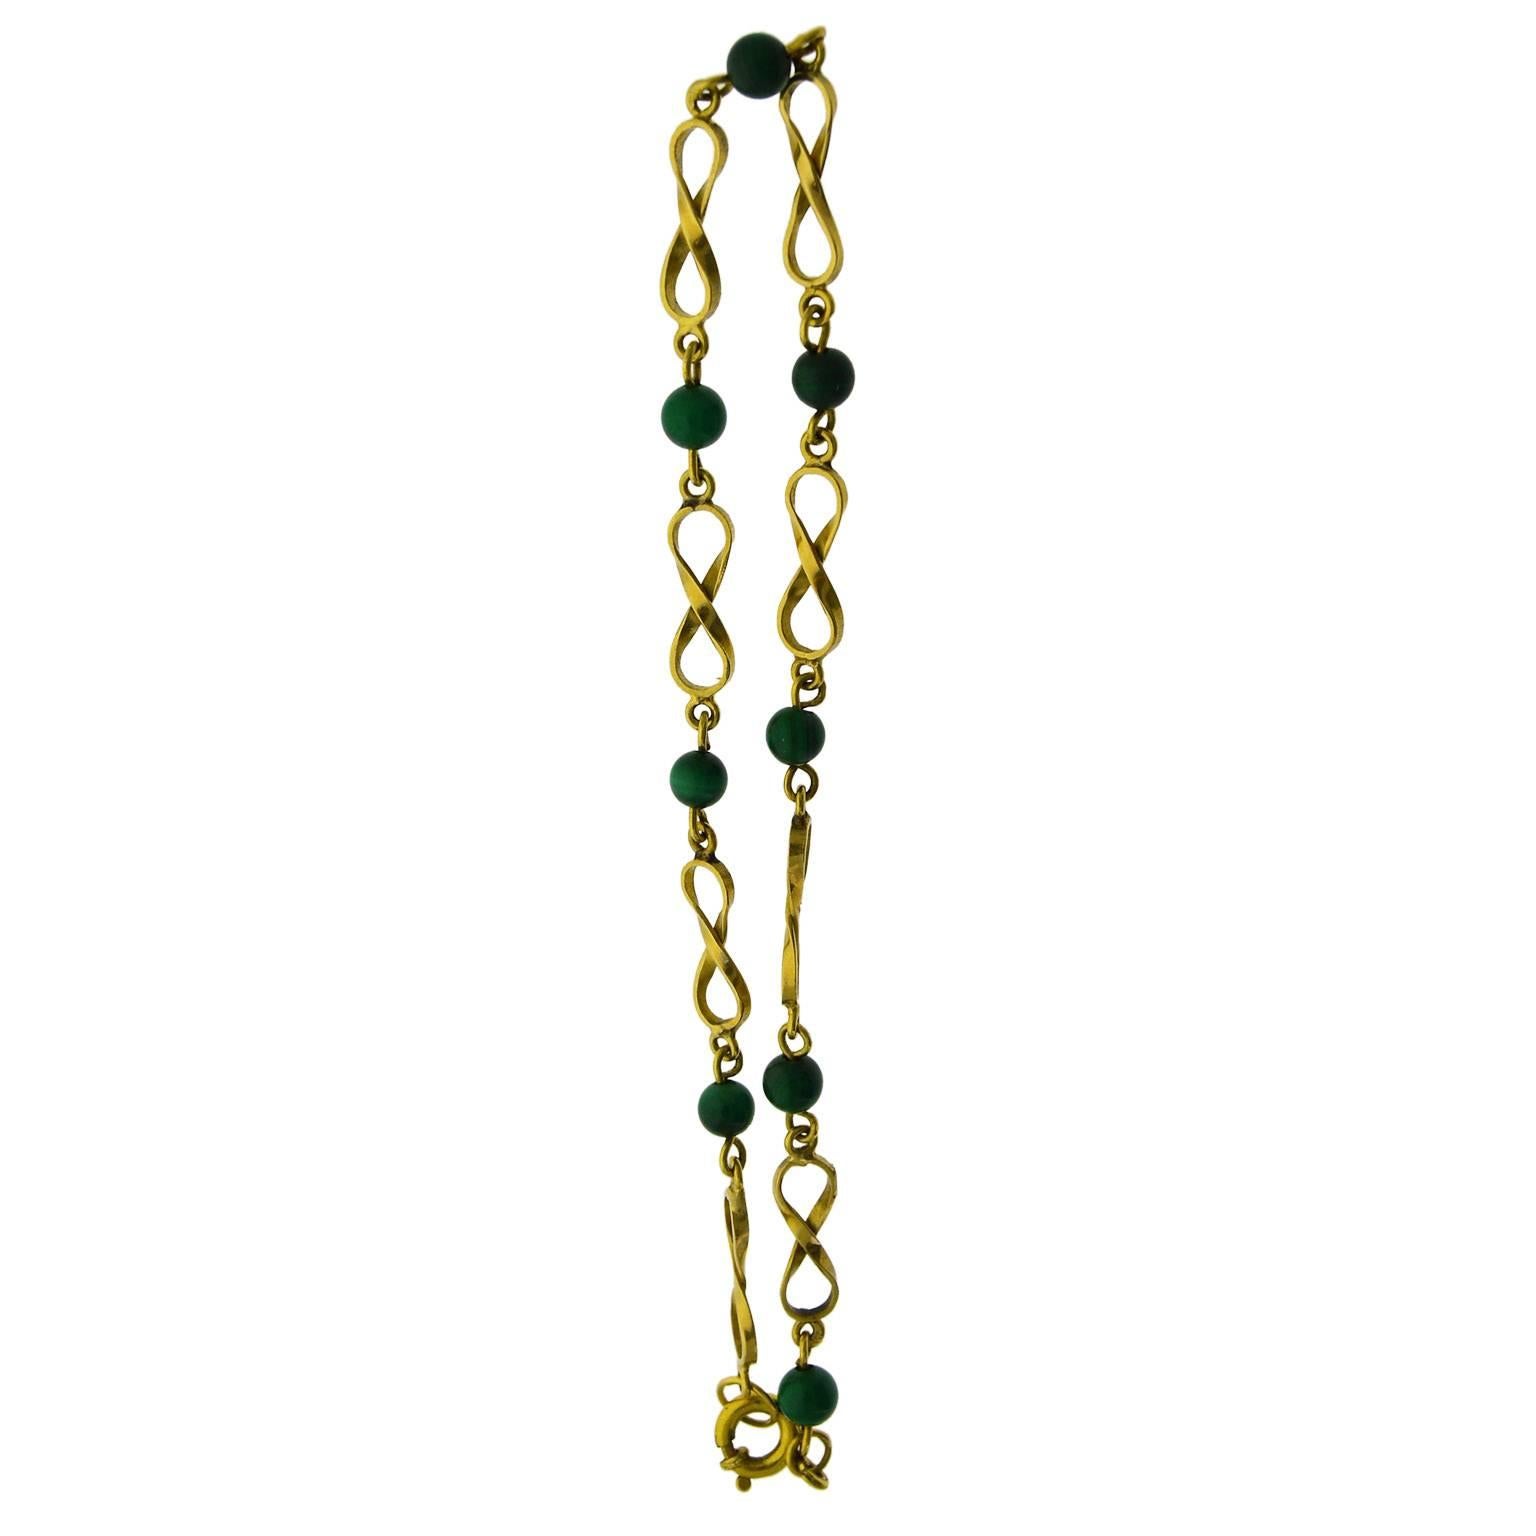 This charming little bracelet is entirely hand constructed. The beads are done in Malachite and the solid 14Kt. gold links are delicately constructed.
The bracelet is 8 inches long, or 20cm. It was likely made in 1930's based on the style and